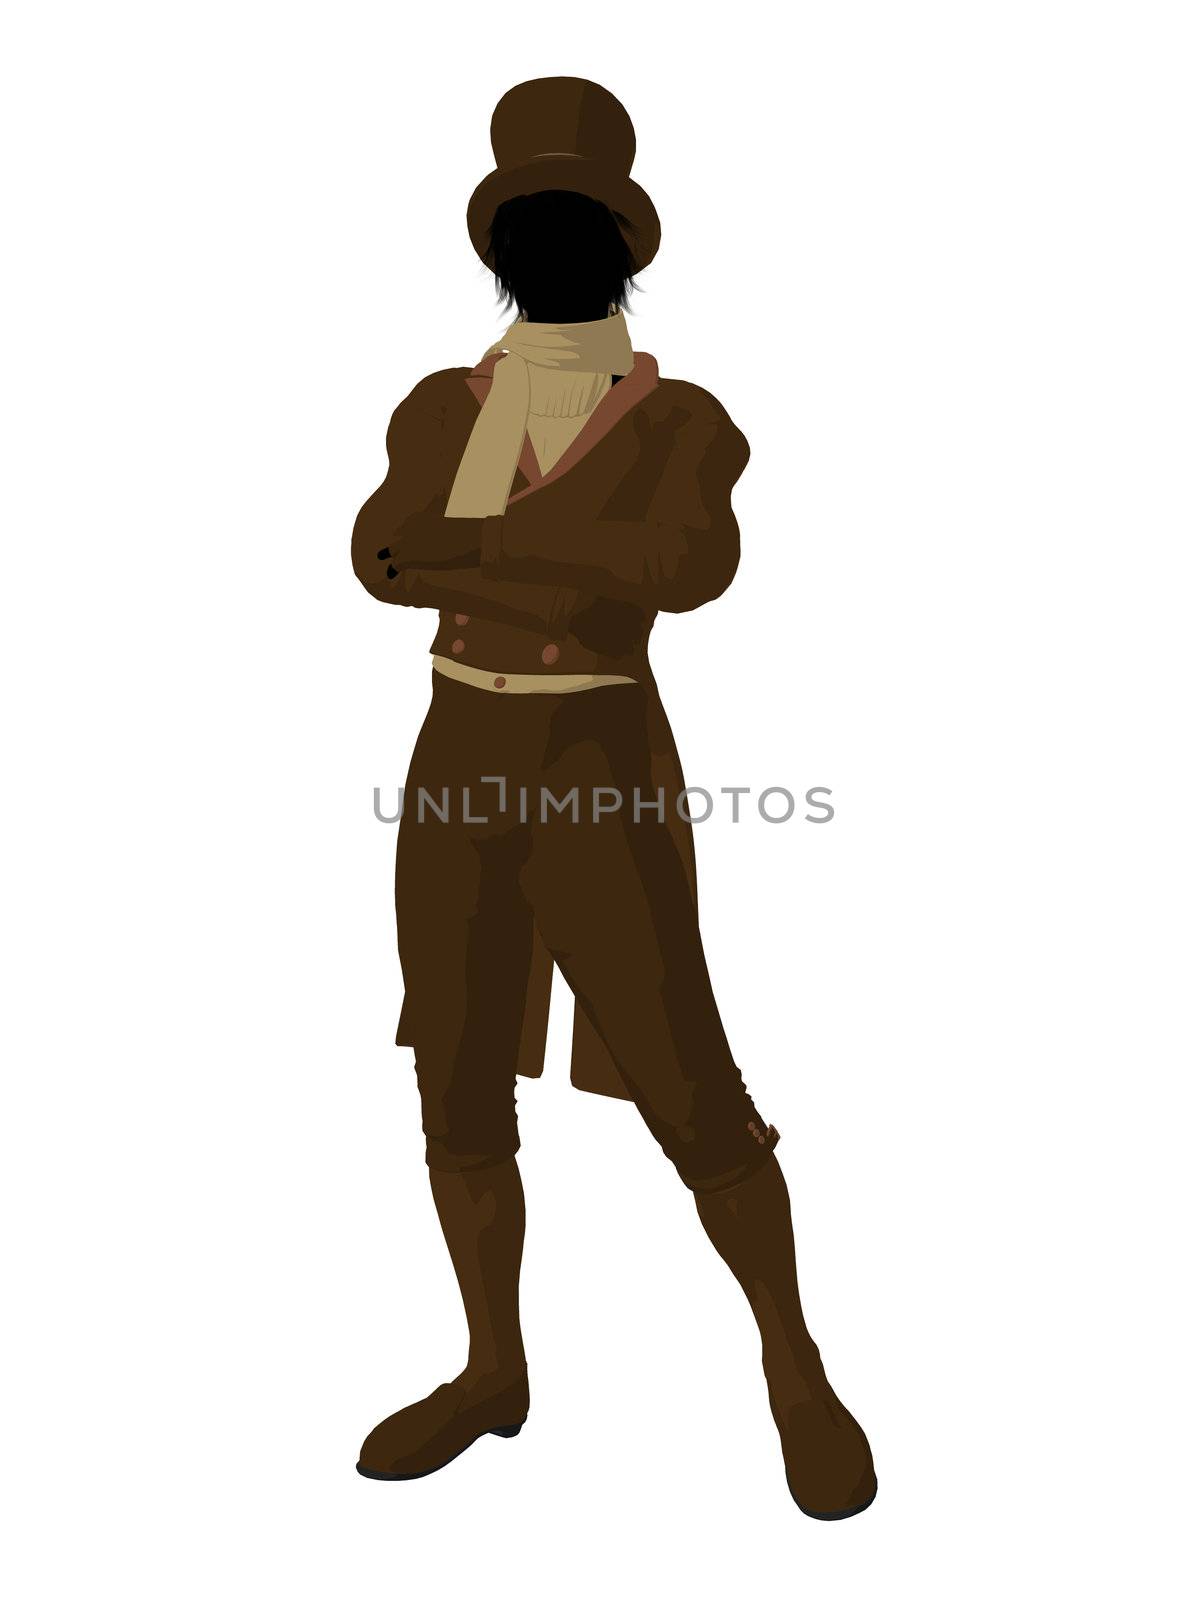 Victorian Man Illustration Silhouette by kathygold